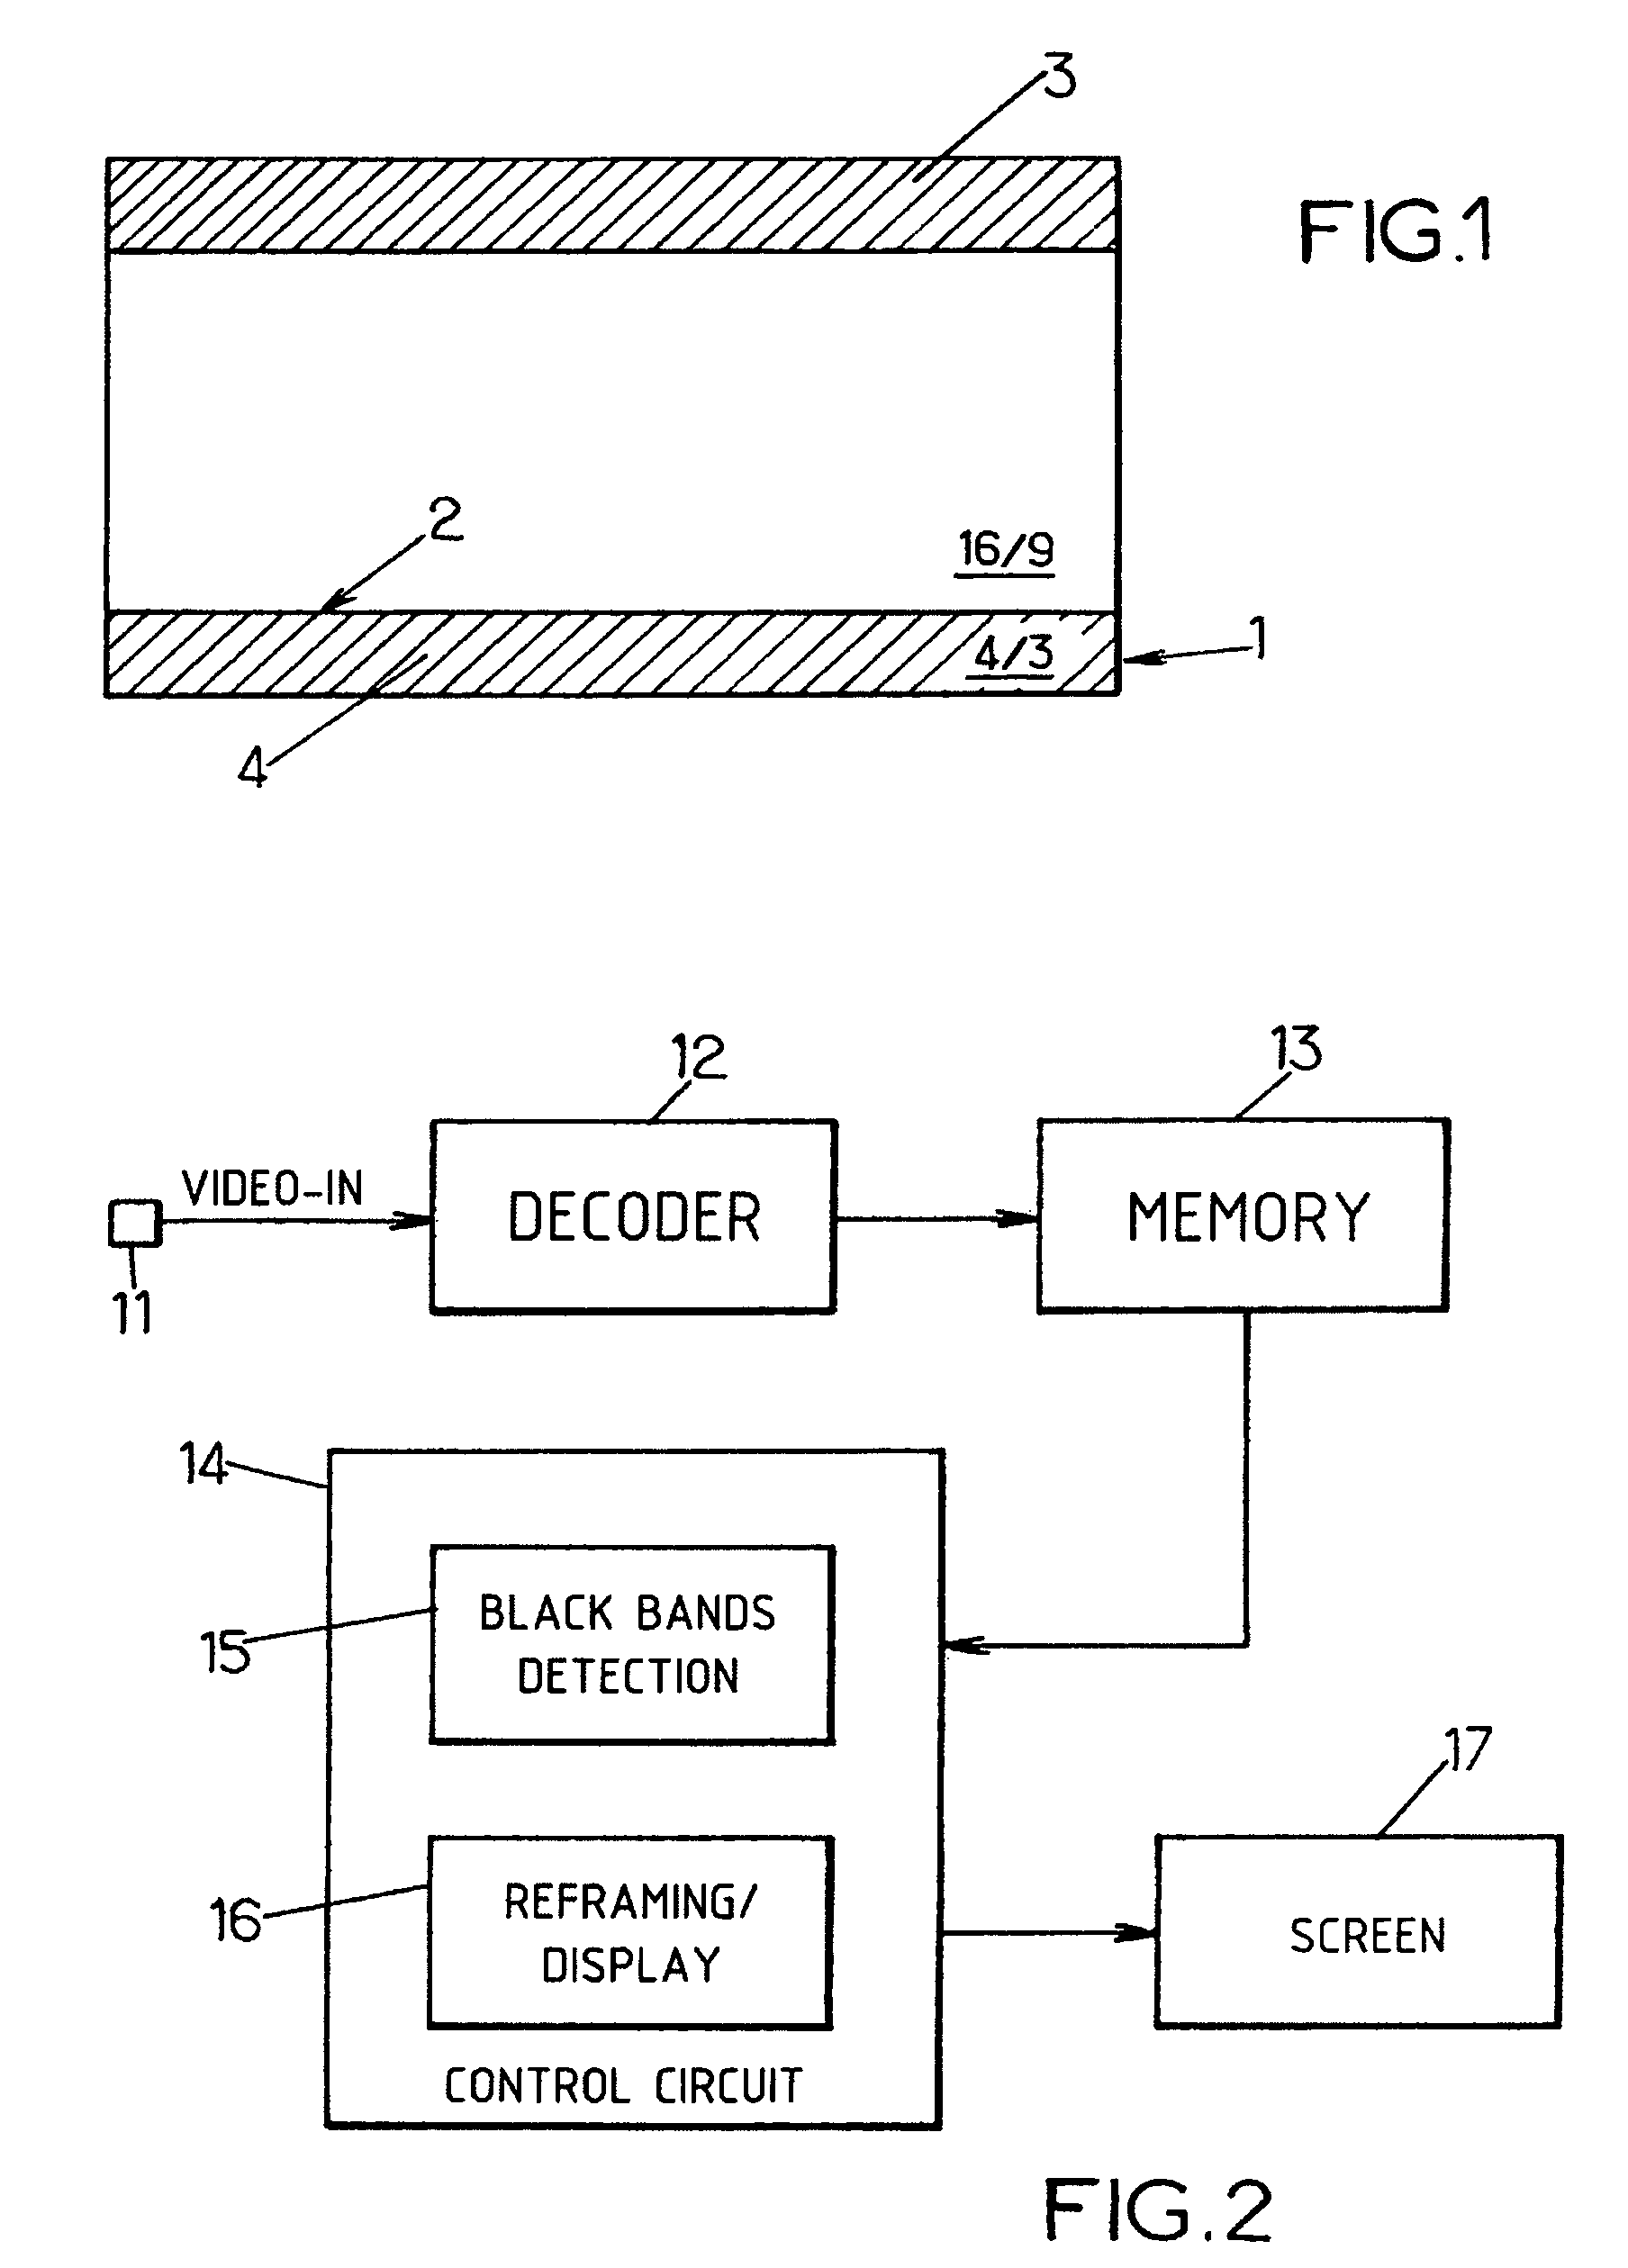 Method and system for video display with automatic reframing